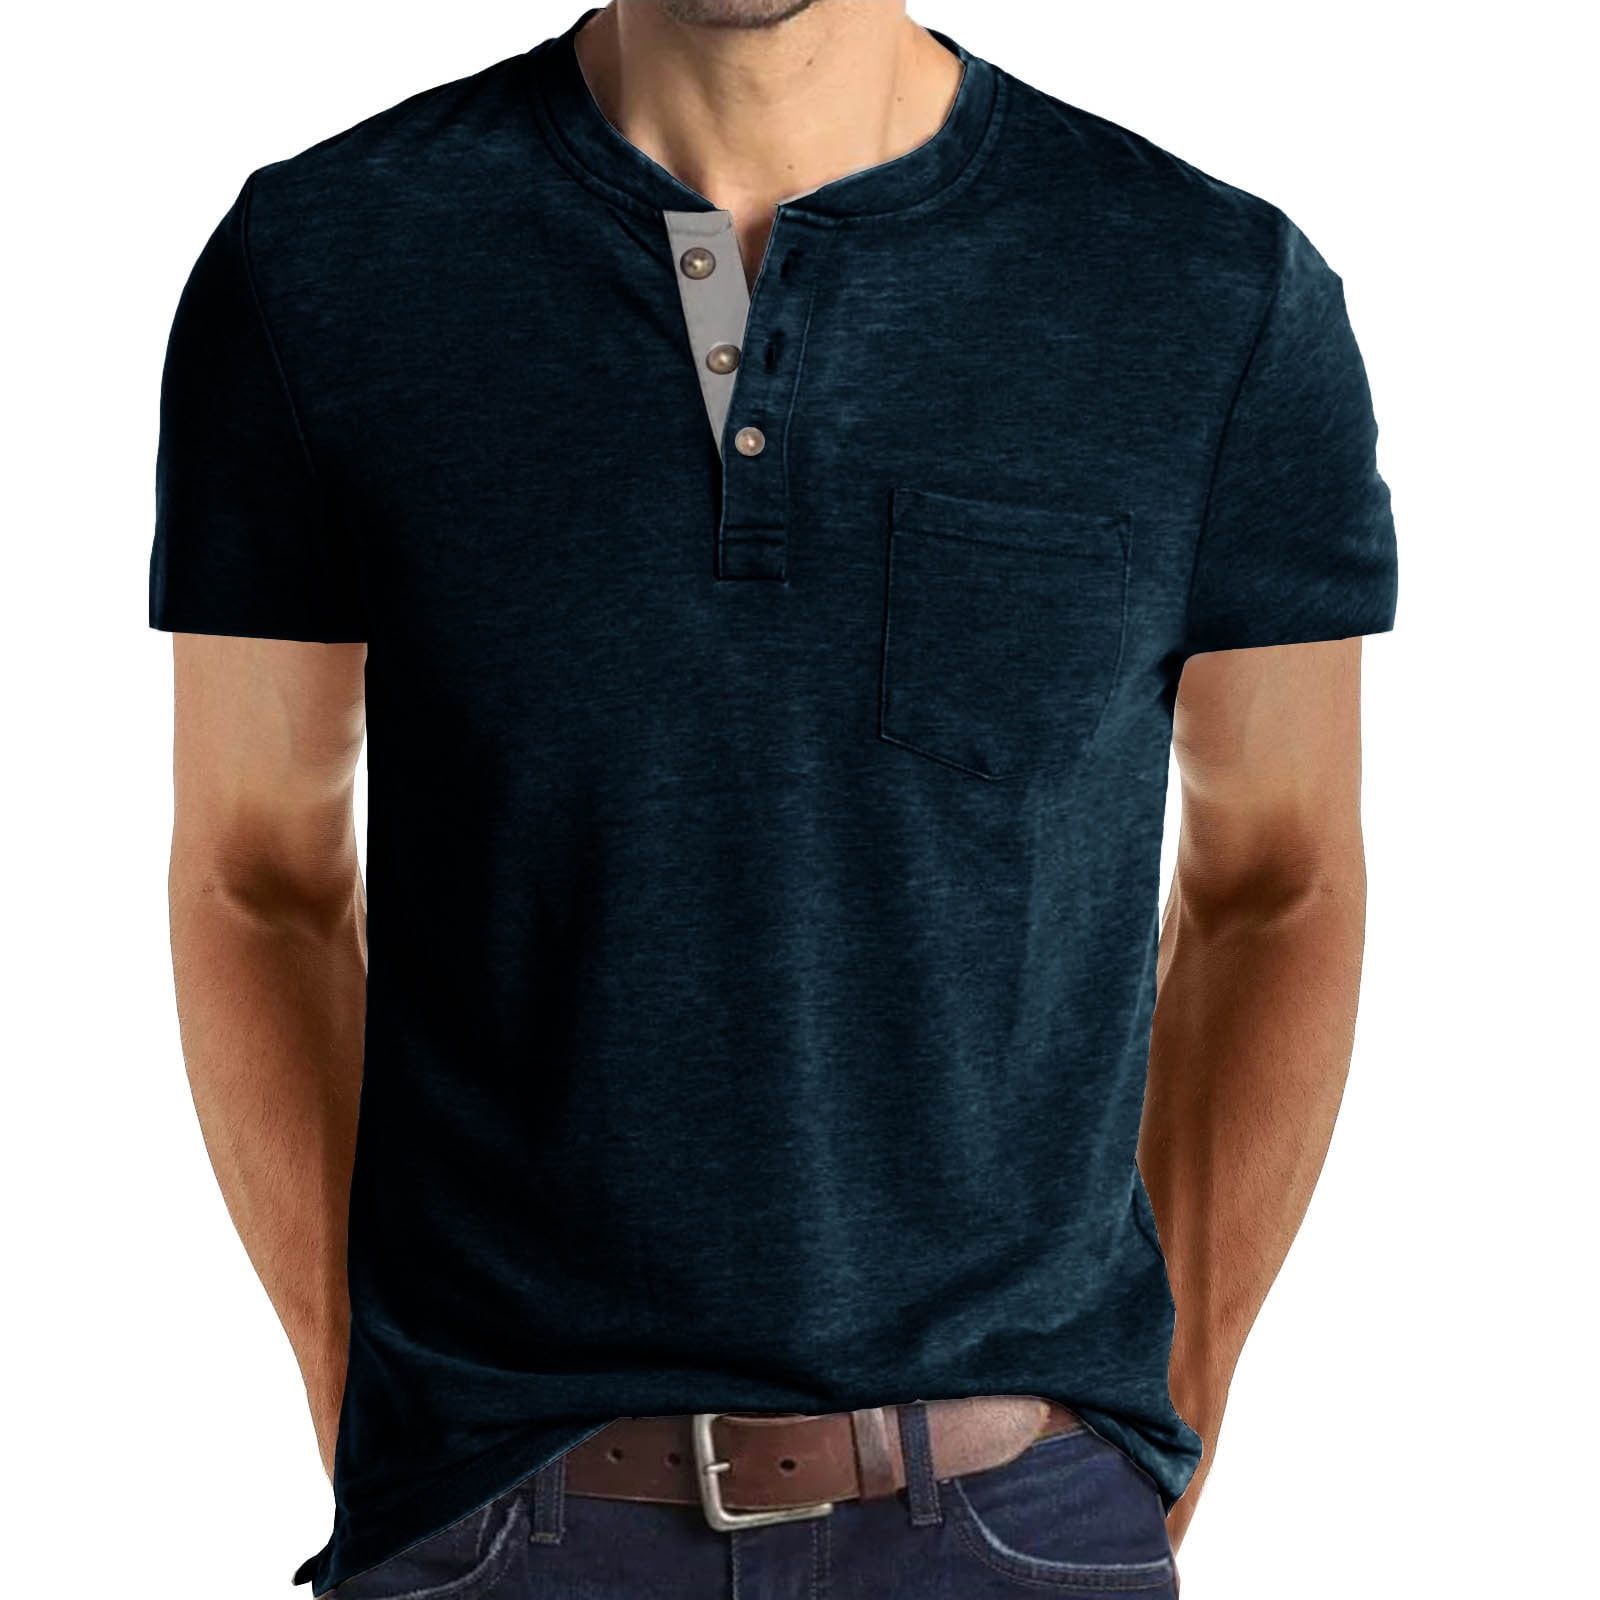 Ptauao Men's Short Sleeve Henley T-Shirts Casual 3 Button Tops with ...